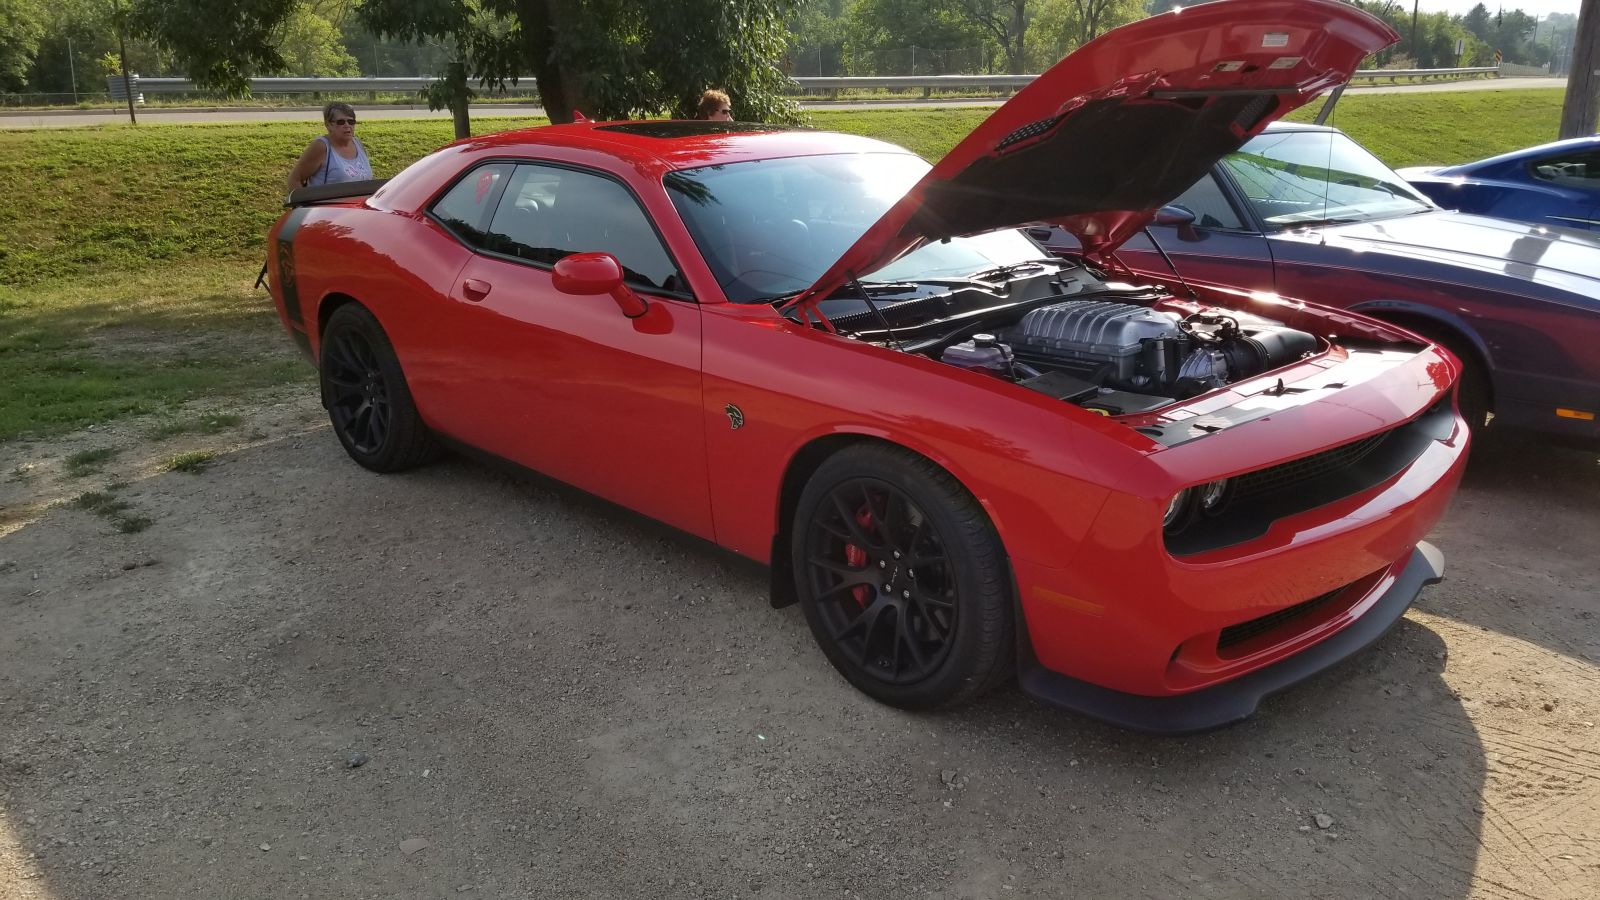 I have never seen a Hellcat in person. I need the engine out of it for reasons. I would also drive the shit out of this car as is. If I owned this, it would be the Green Go color.